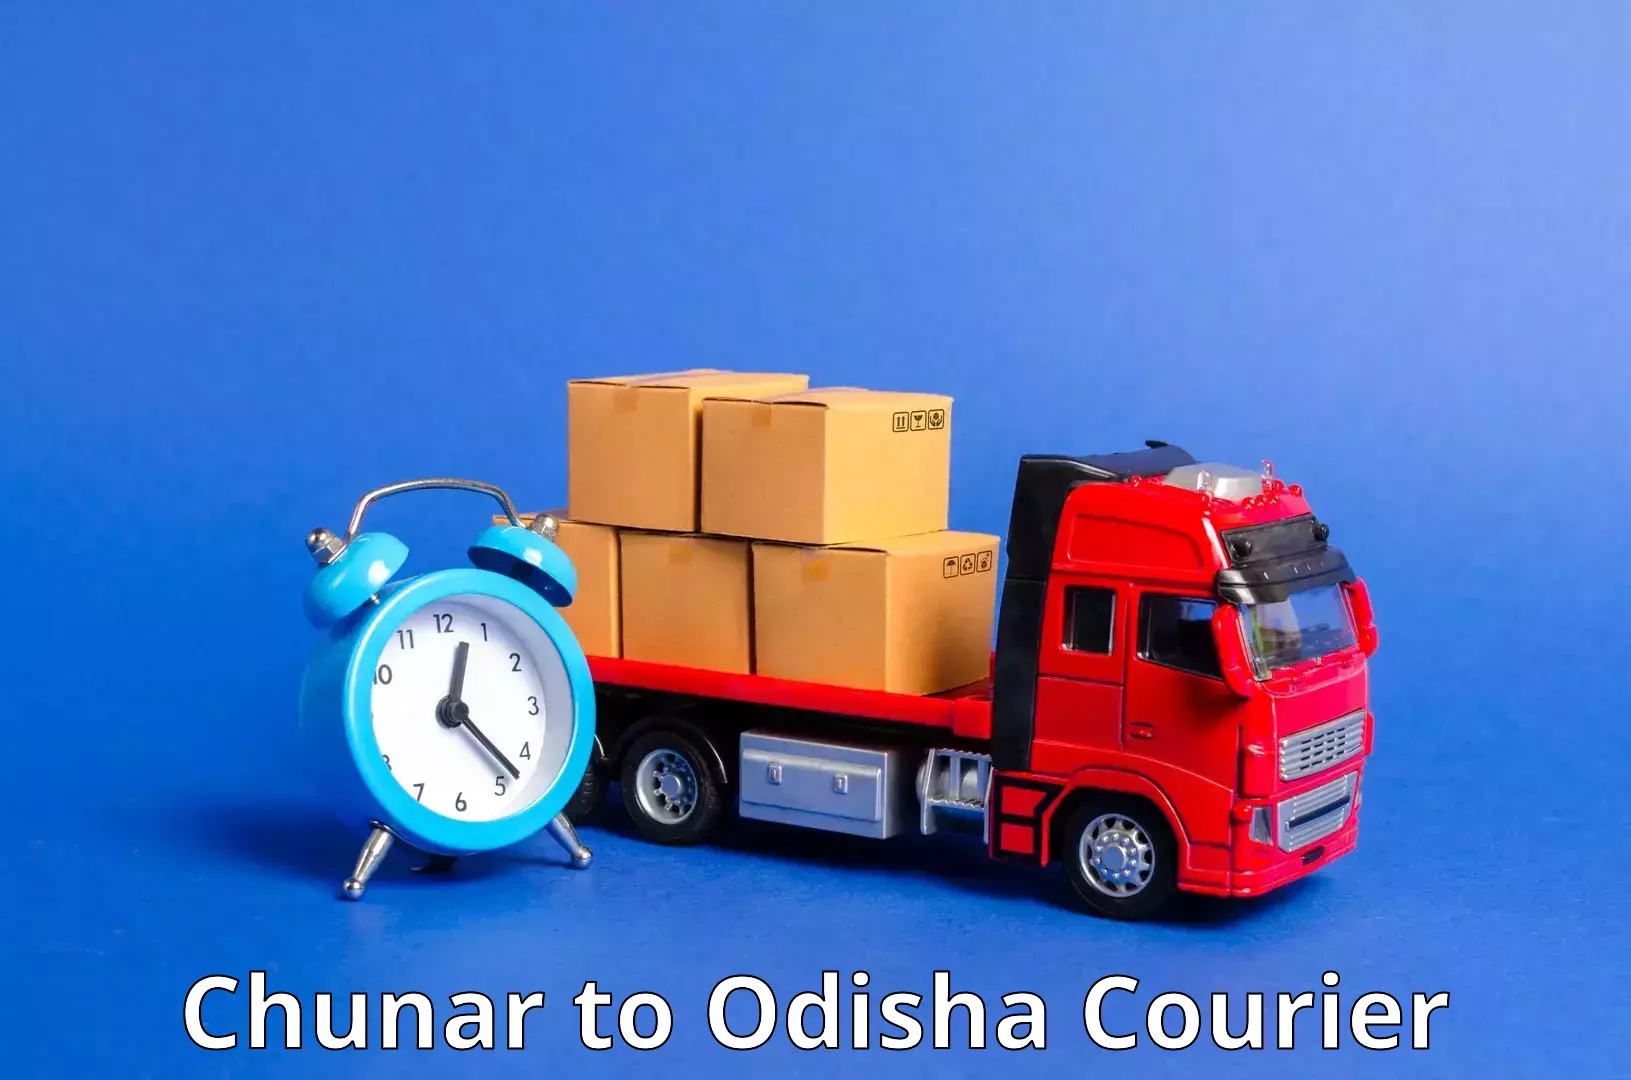 Next-day delivery options in Chunar to Kishorenagar